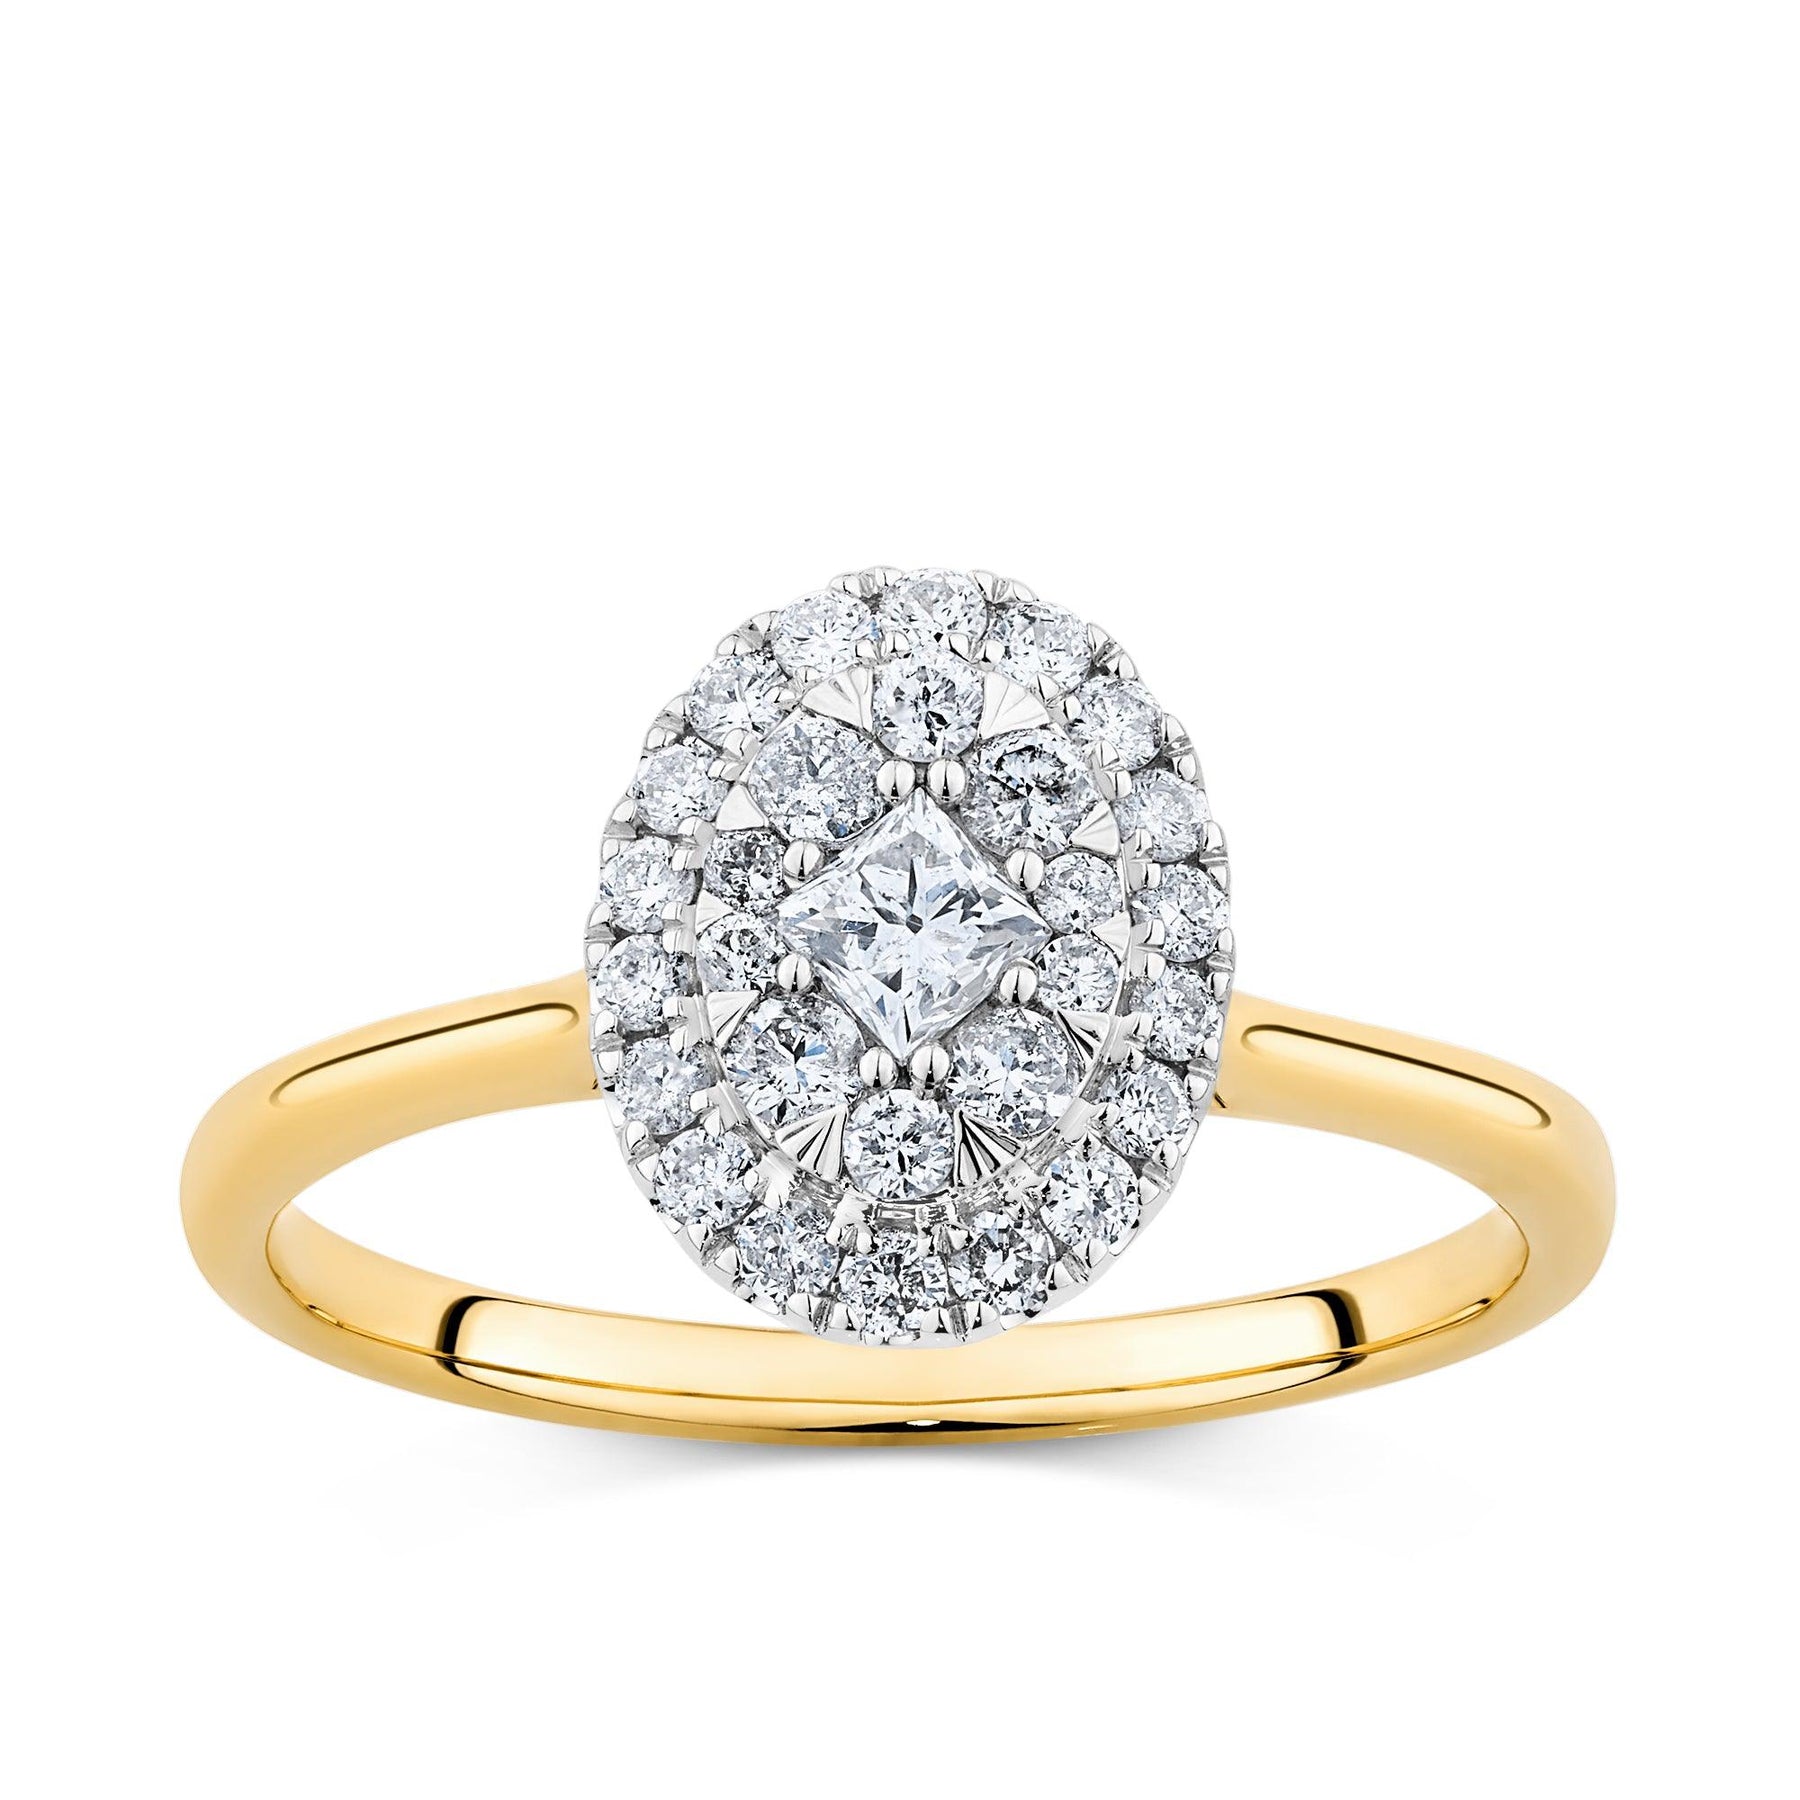 0.518ct TW Diamond Oval Halo Engagement Ring in 9ct Yellow and White Gold - Wallace Bishop